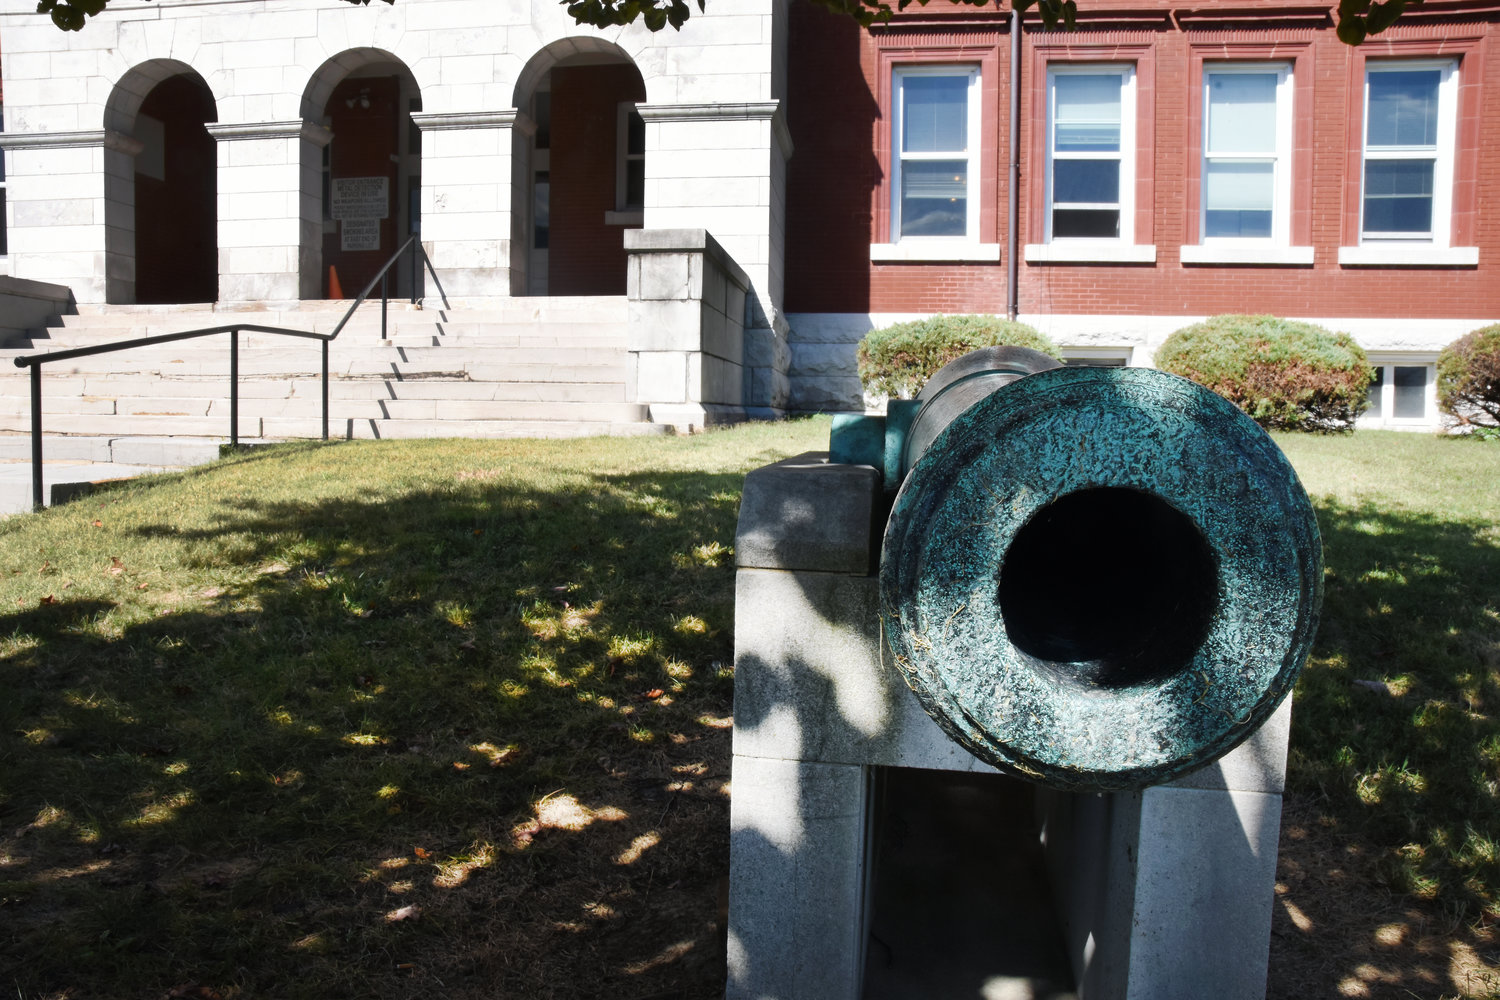 the Little Brass Cannon that guards Gasconade County’s Courthouse at Hermann is a memento  from the waning hours of the Civil War, and played a small part in a skirmish 157 years ago this month that slowed the Confederate march on the State Capitol at Jefferson City.